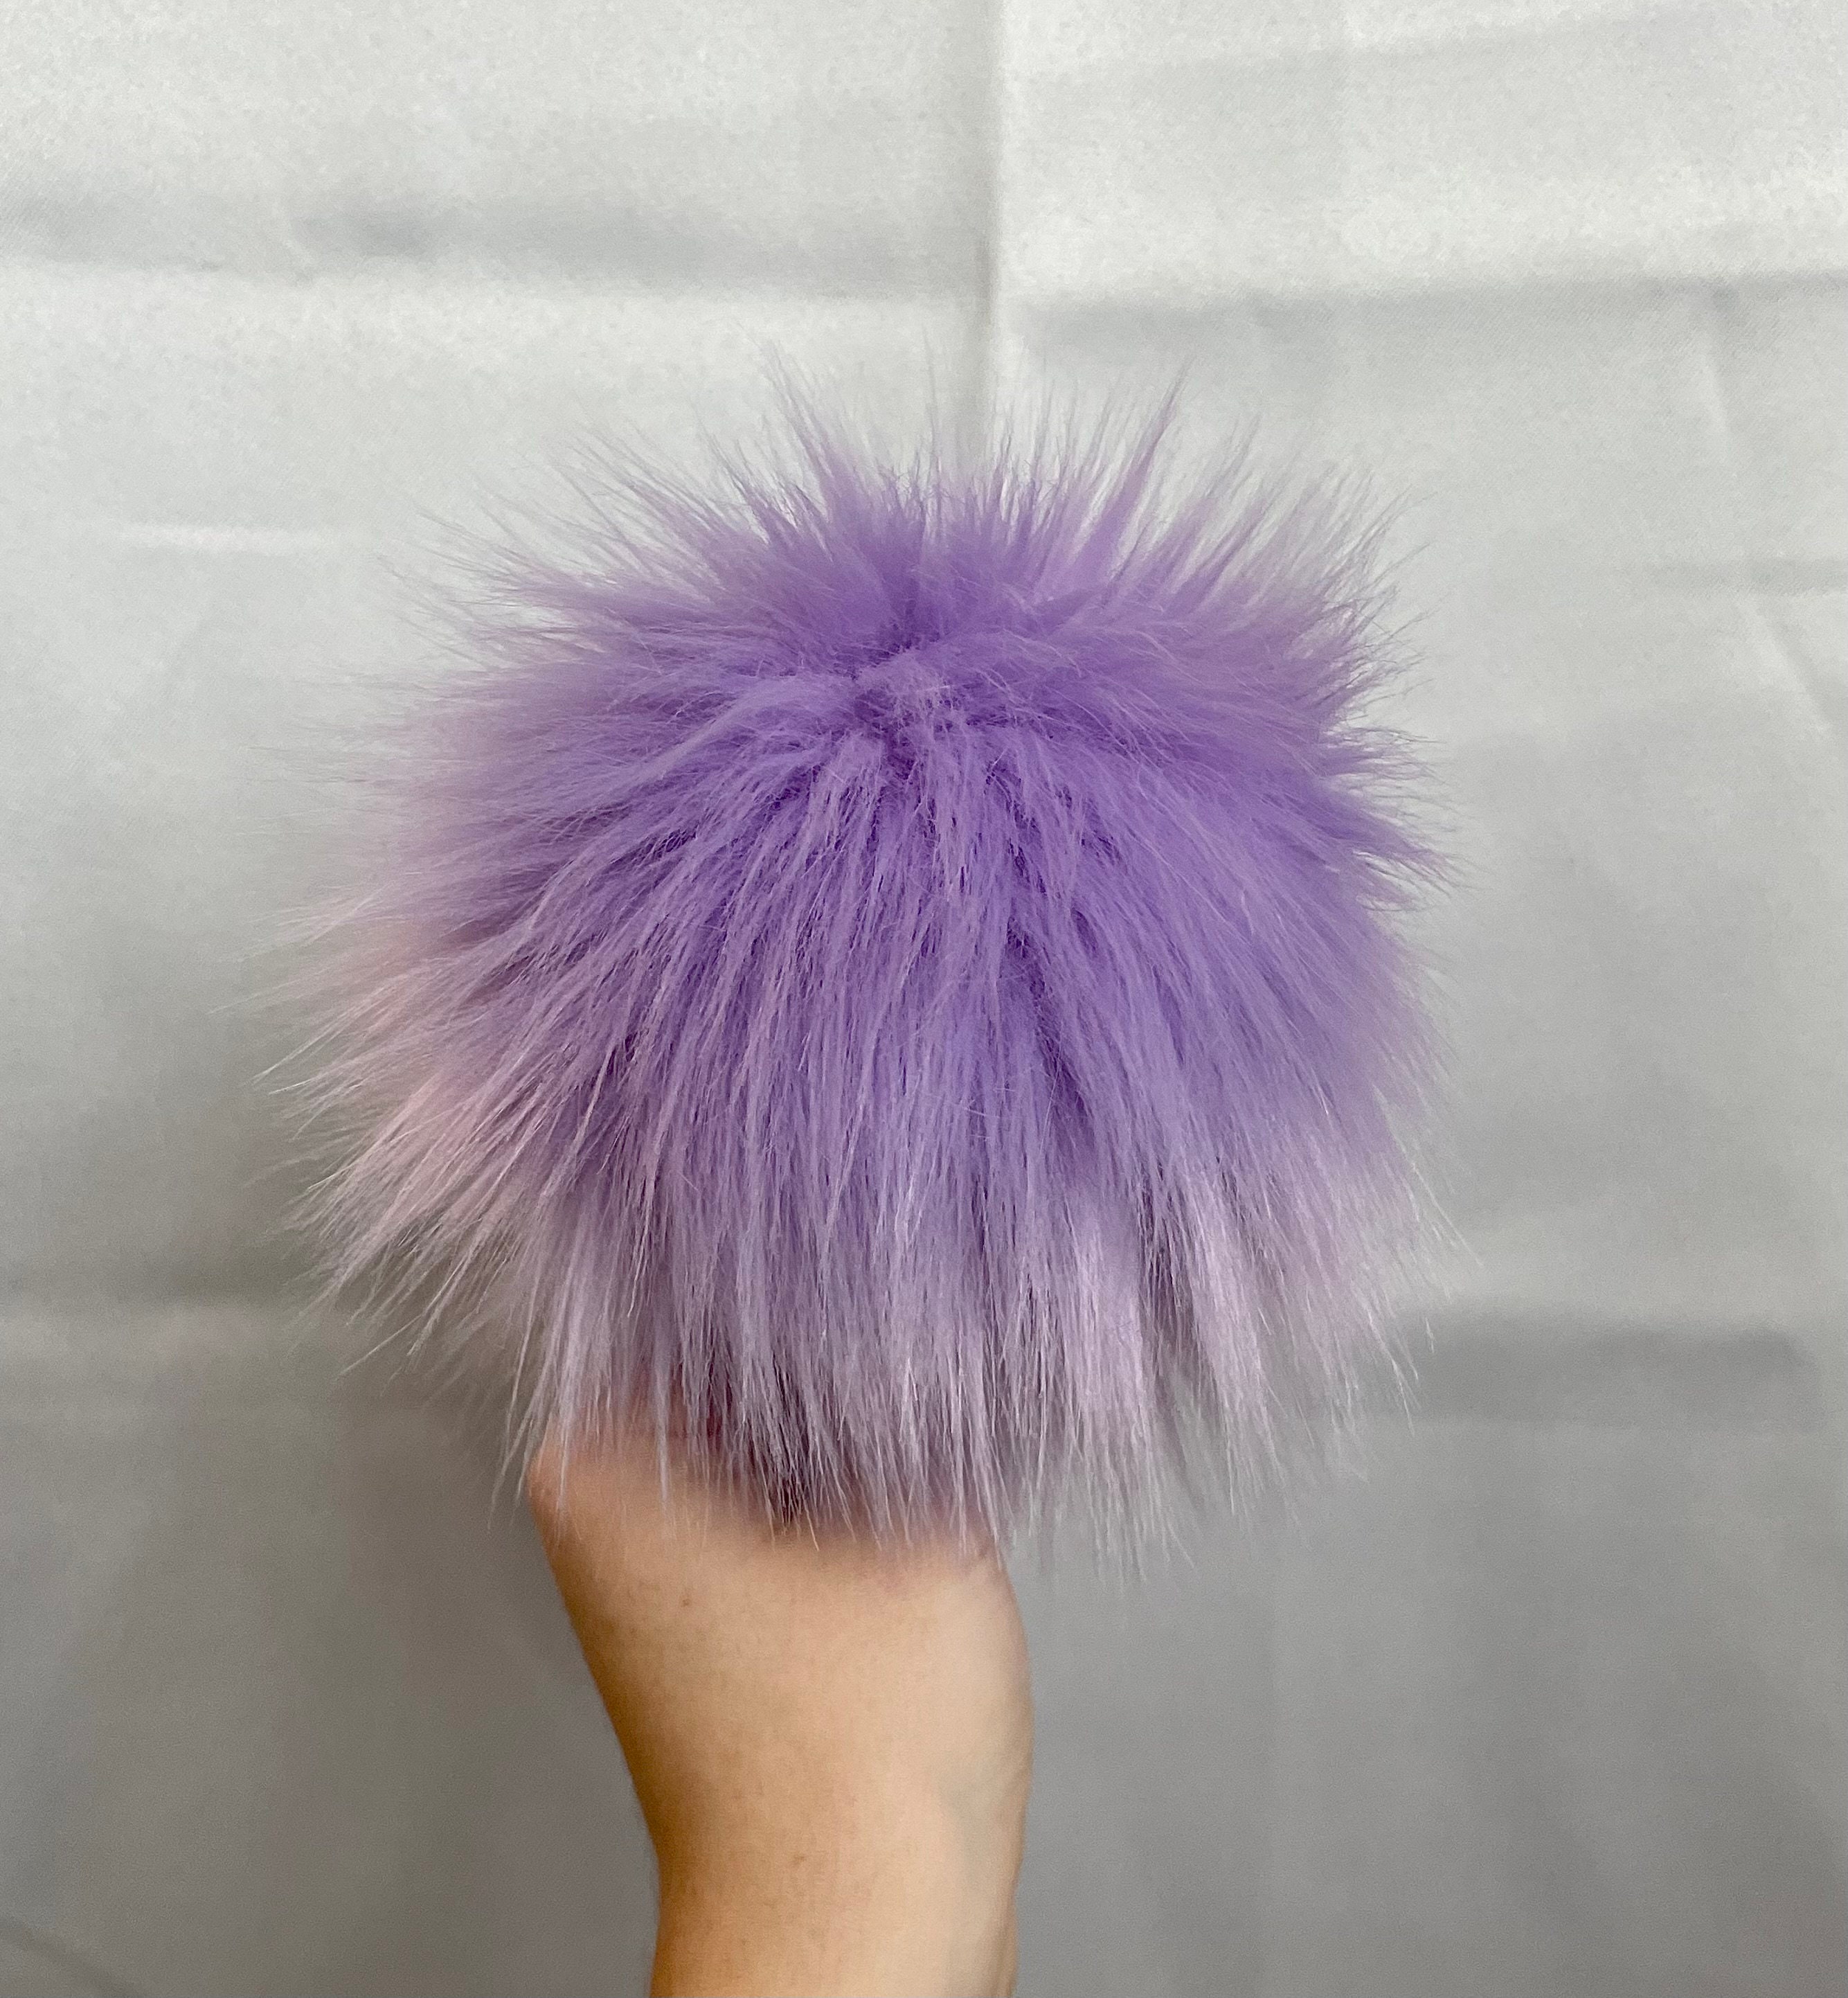 Lavender Faux Fur Pom Pom, Knit, Crochet, Small, Medium, Large, Fluffy, Pre  Made, Tie On, Cotton String, for Beanies, Scarves 